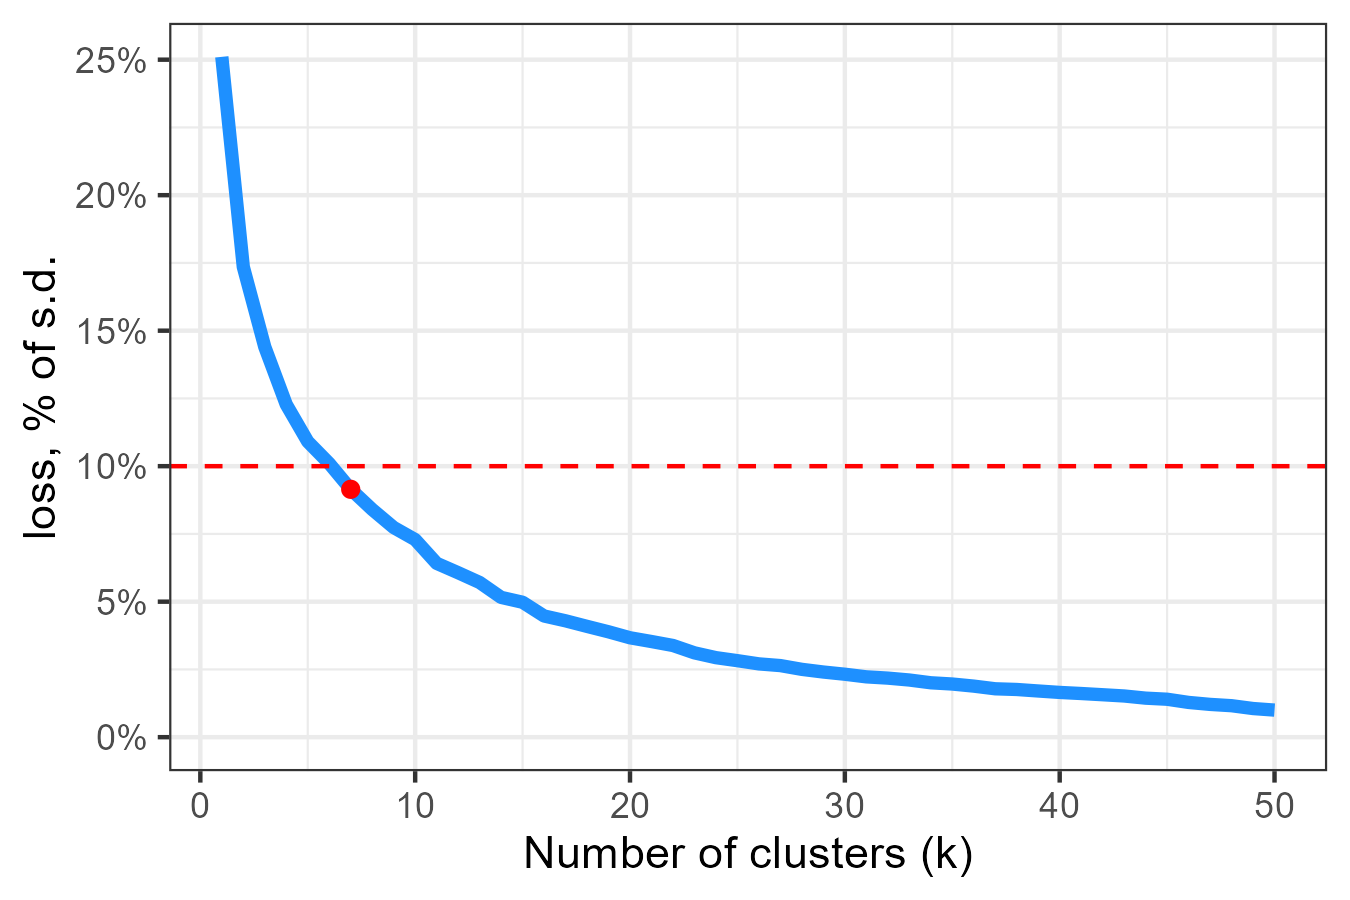 Loss of information as a function of number of clusters